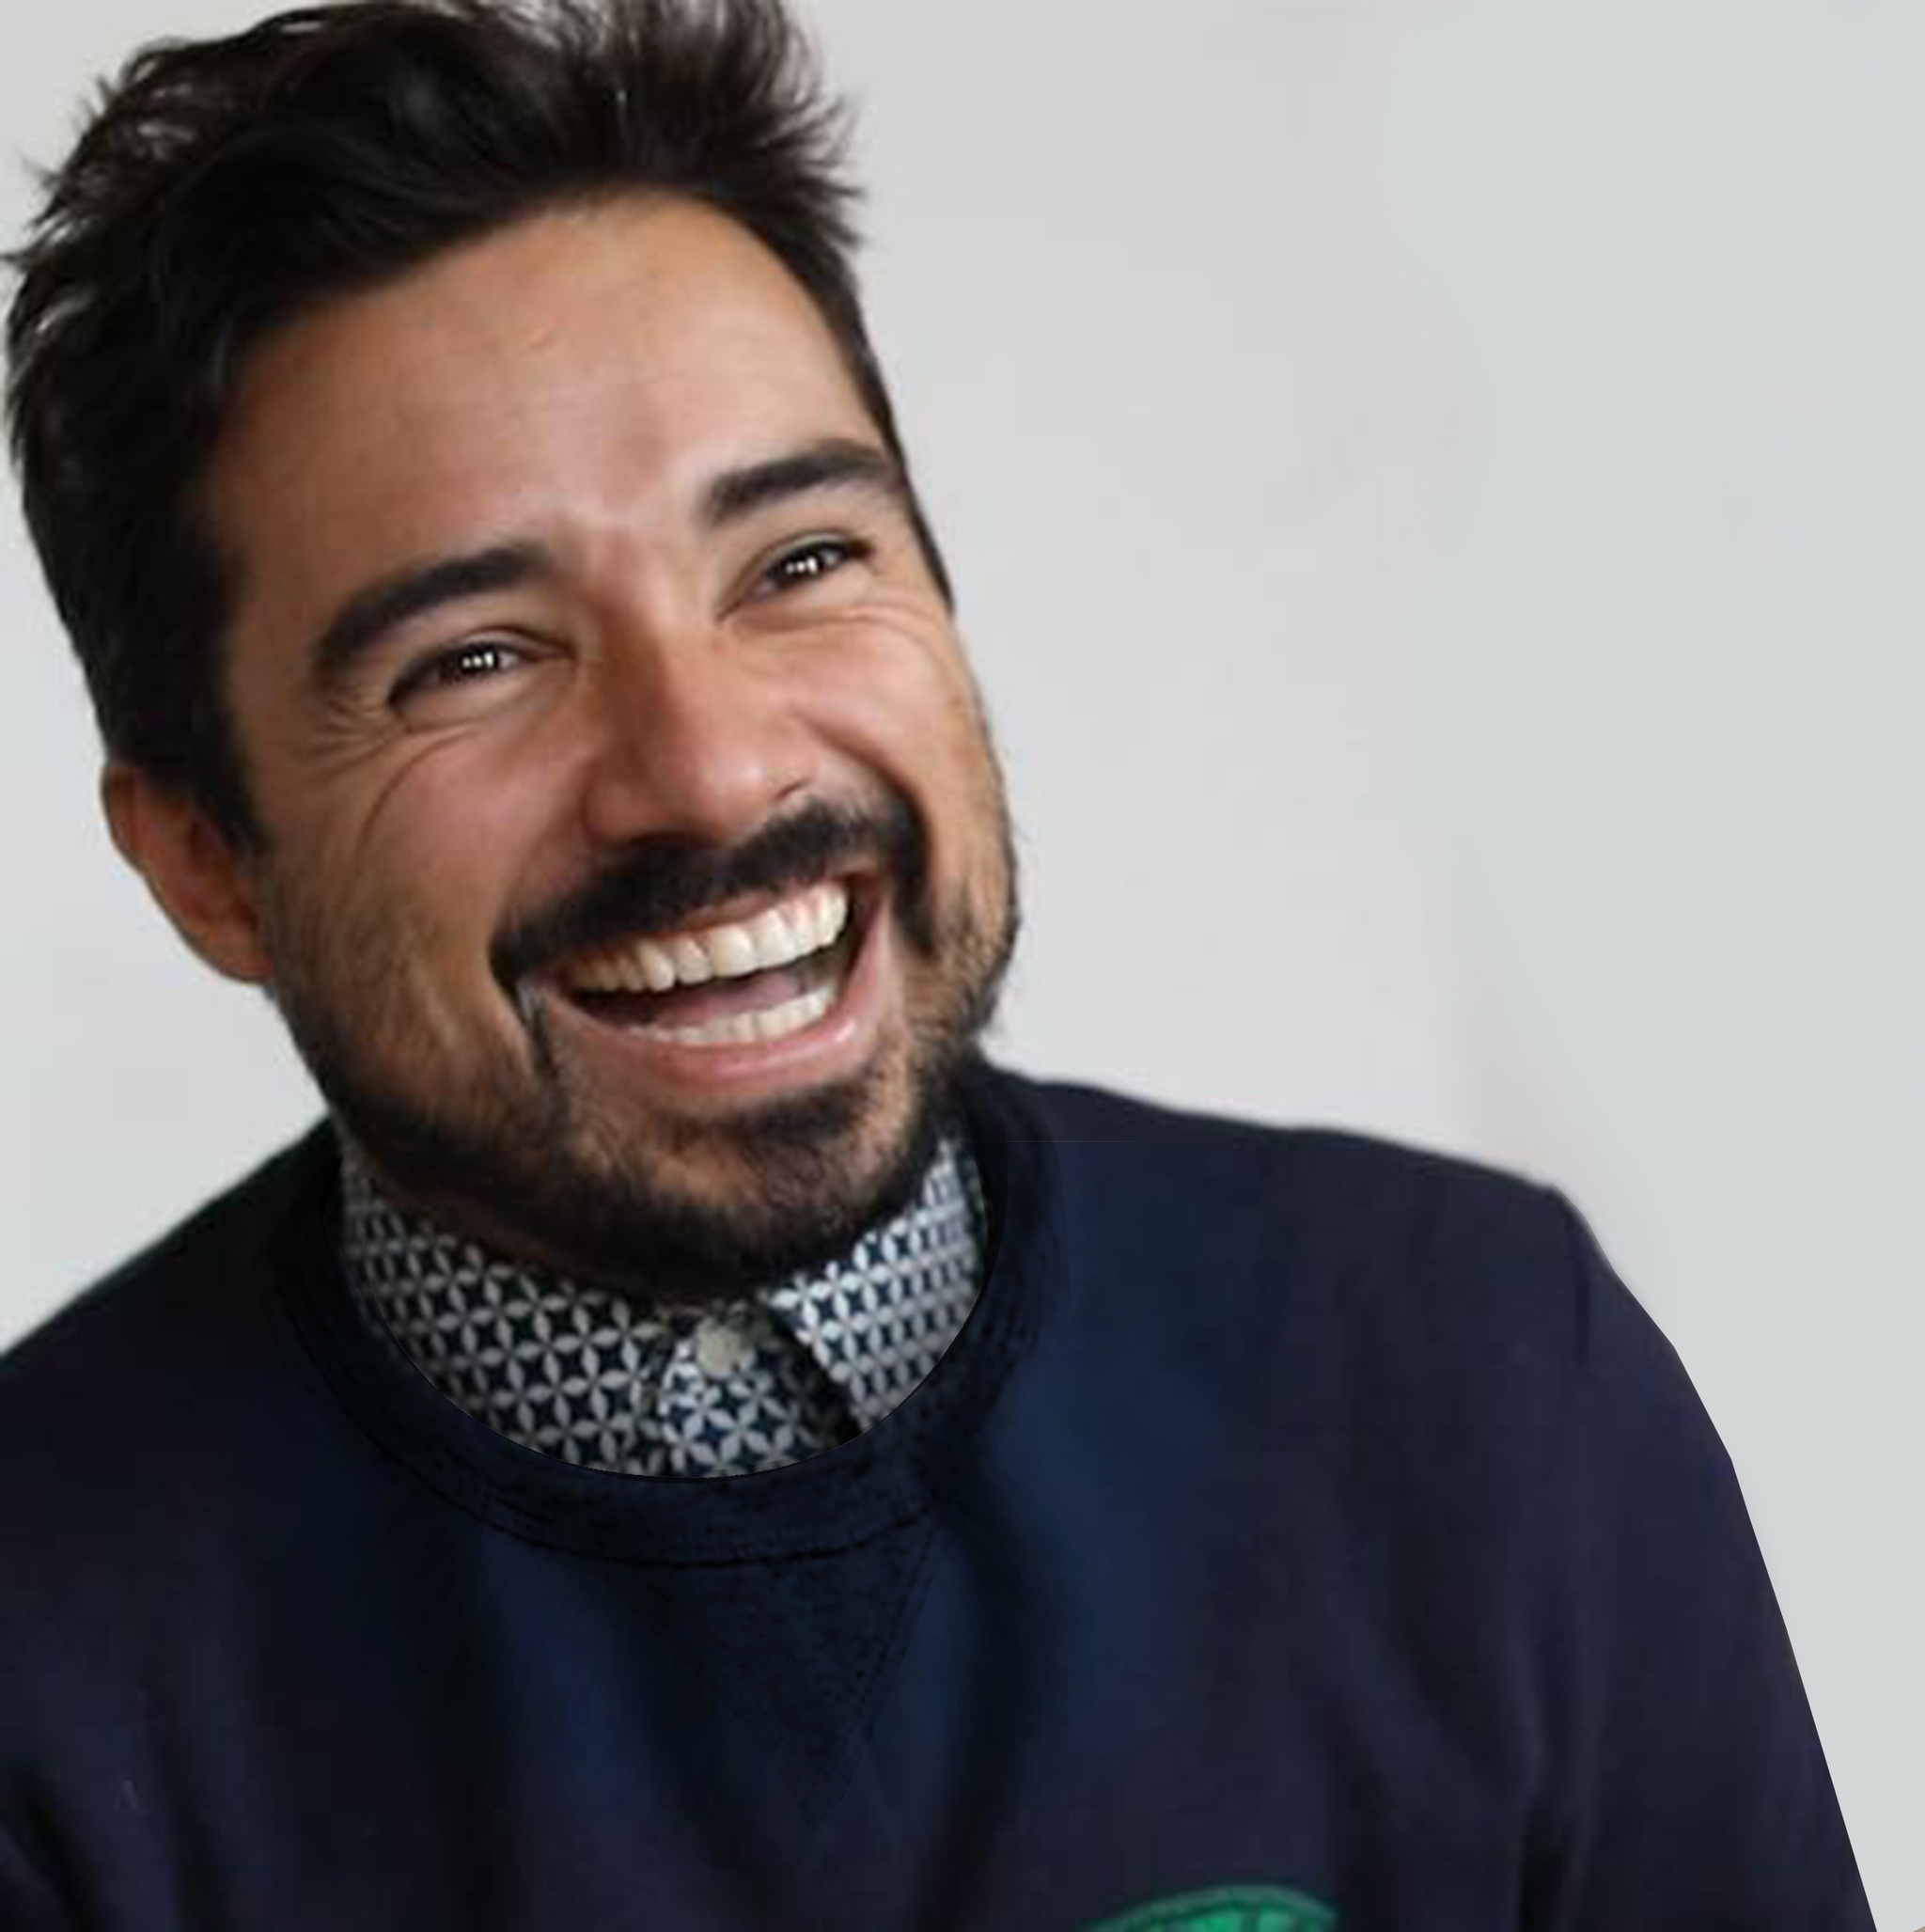 A portrait of Yazmany Arboleda, a Colombian American man who wears a blue sweater with a collared shirt beneath it. He laughs and looks to the side of the image. 